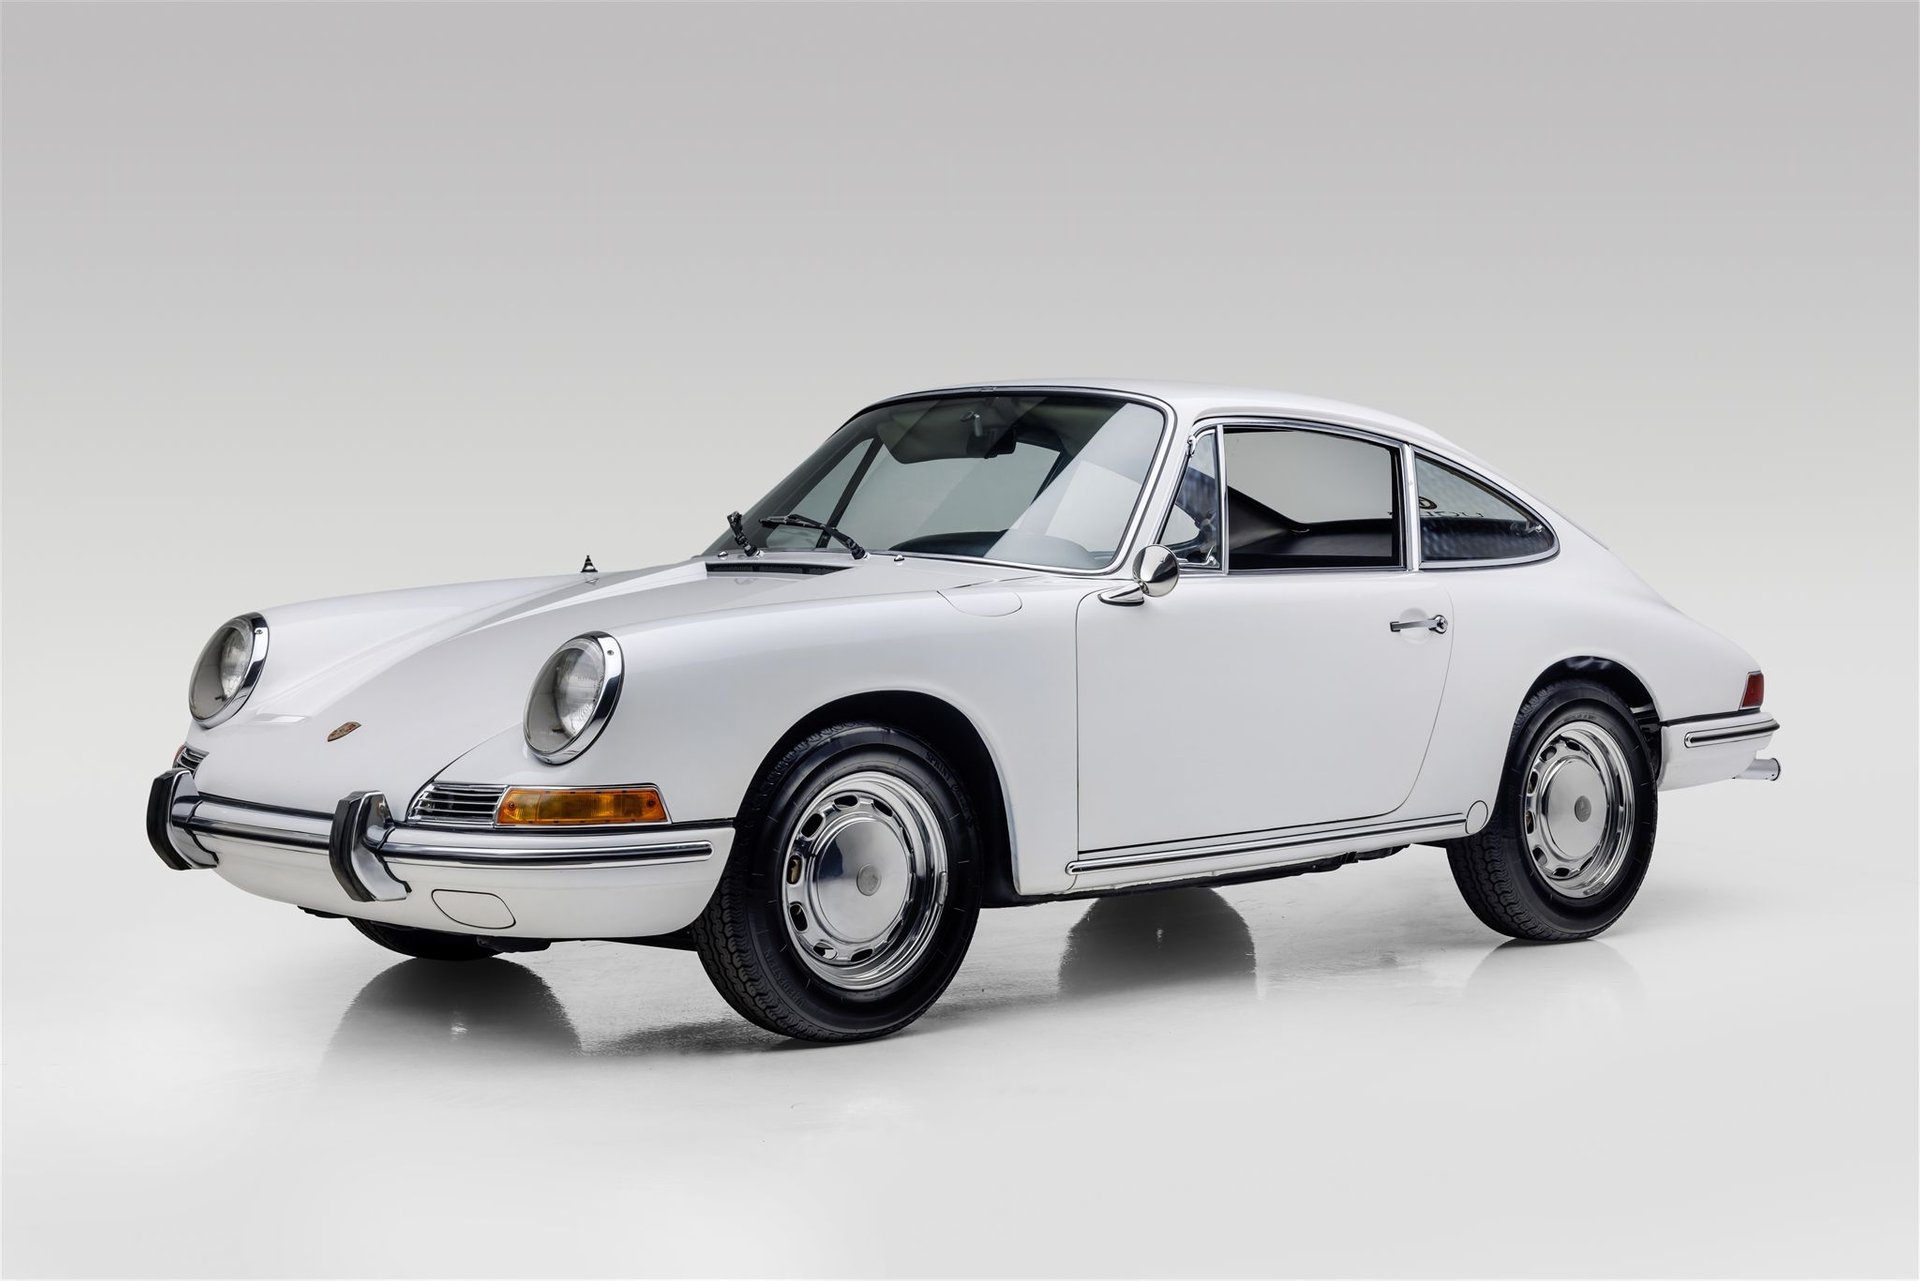 Front-angled view of a white 1965 Porsche 912 against a white background.